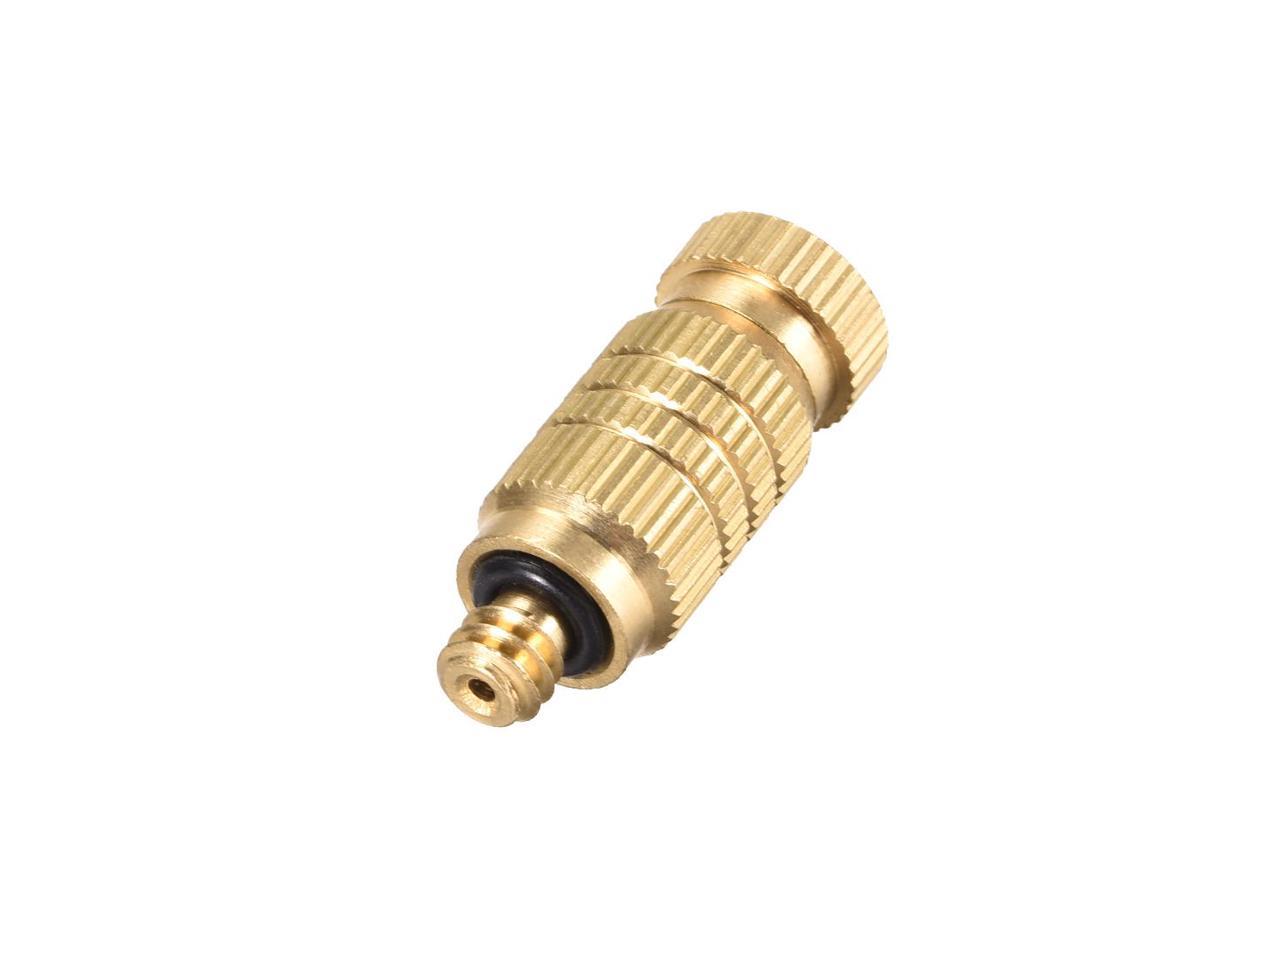 Details about   0.15-0.8mm Dia Misting Nozzle Plug For Outdoor Cooling System 3/16 Thread Brass 